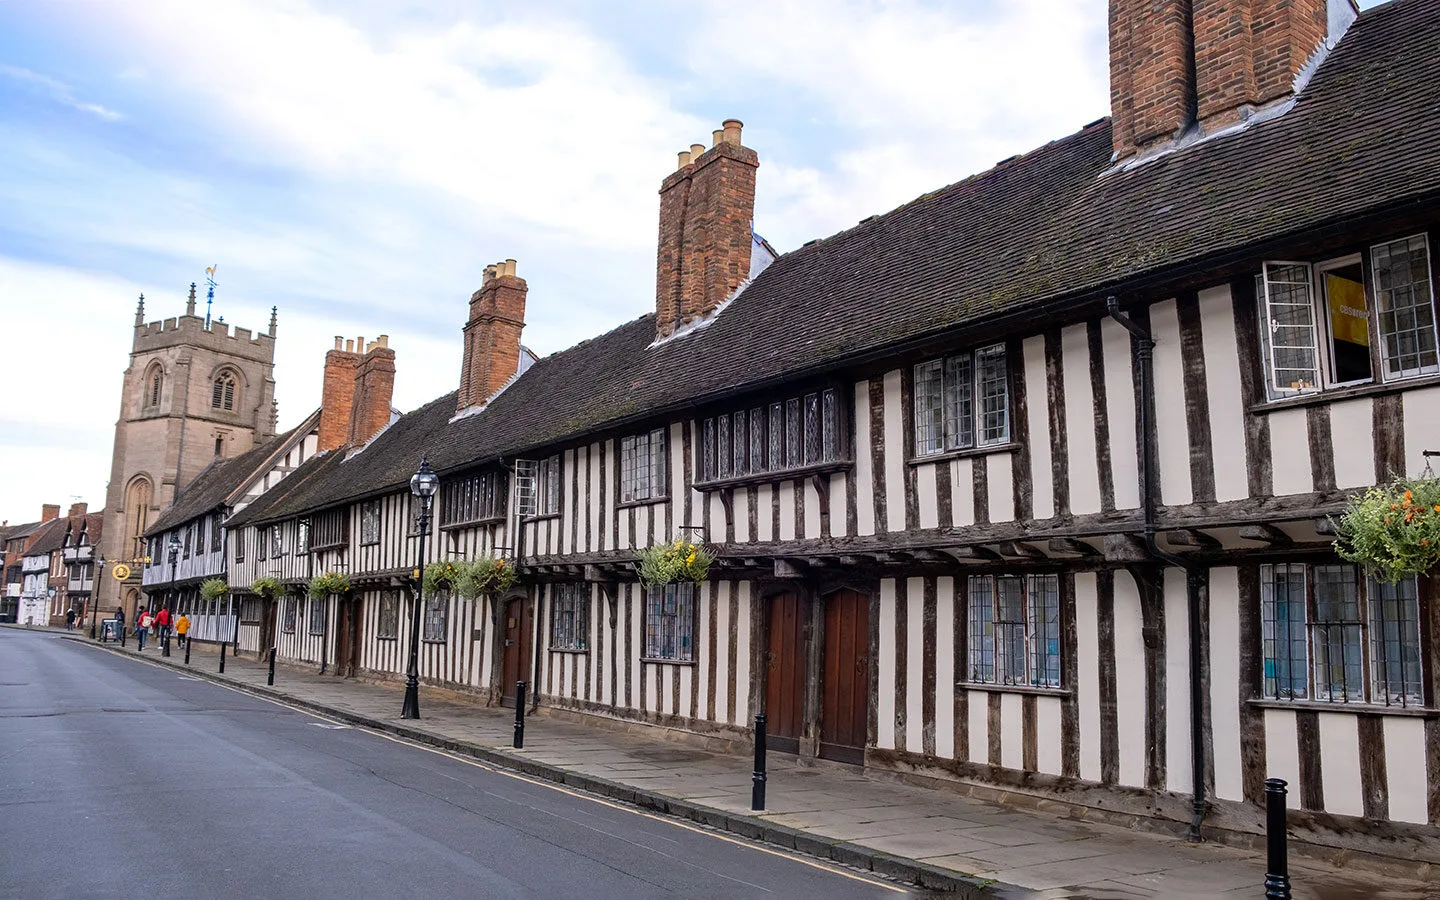 Half-timbered buildings on Church Street in Stratford